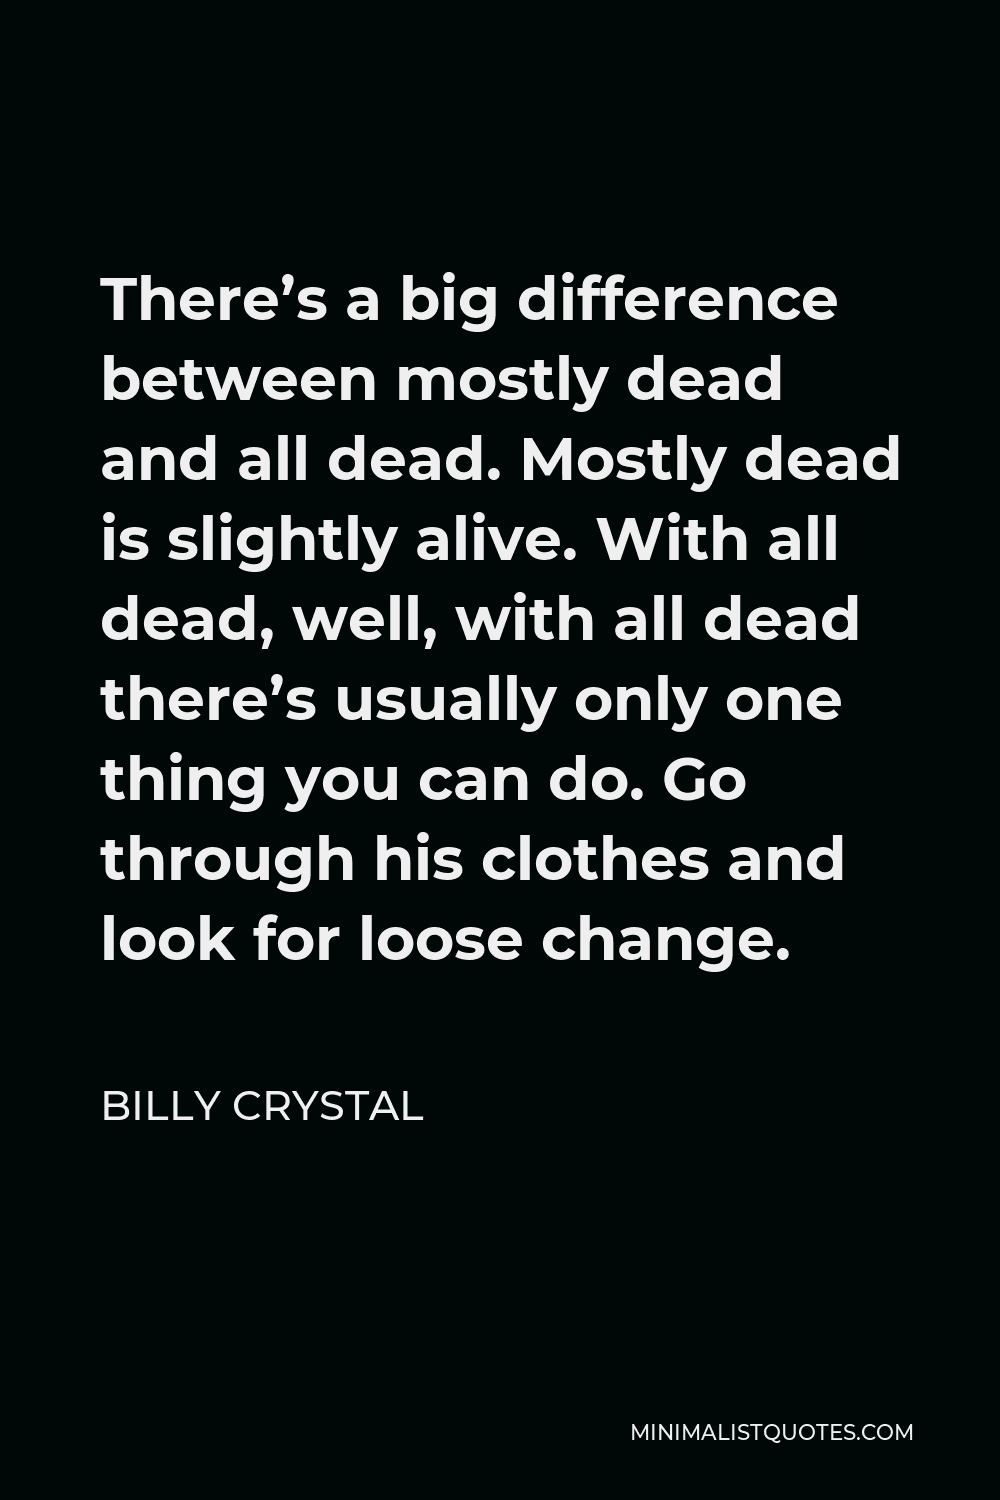 Billy Crystal Quote - There’s a big difference between mostly dead and all dead. Mostly dead is slightly alive. With all dead, well, with all dead there’s usually only one thing you can do. Go through his clothes and look for loose change.